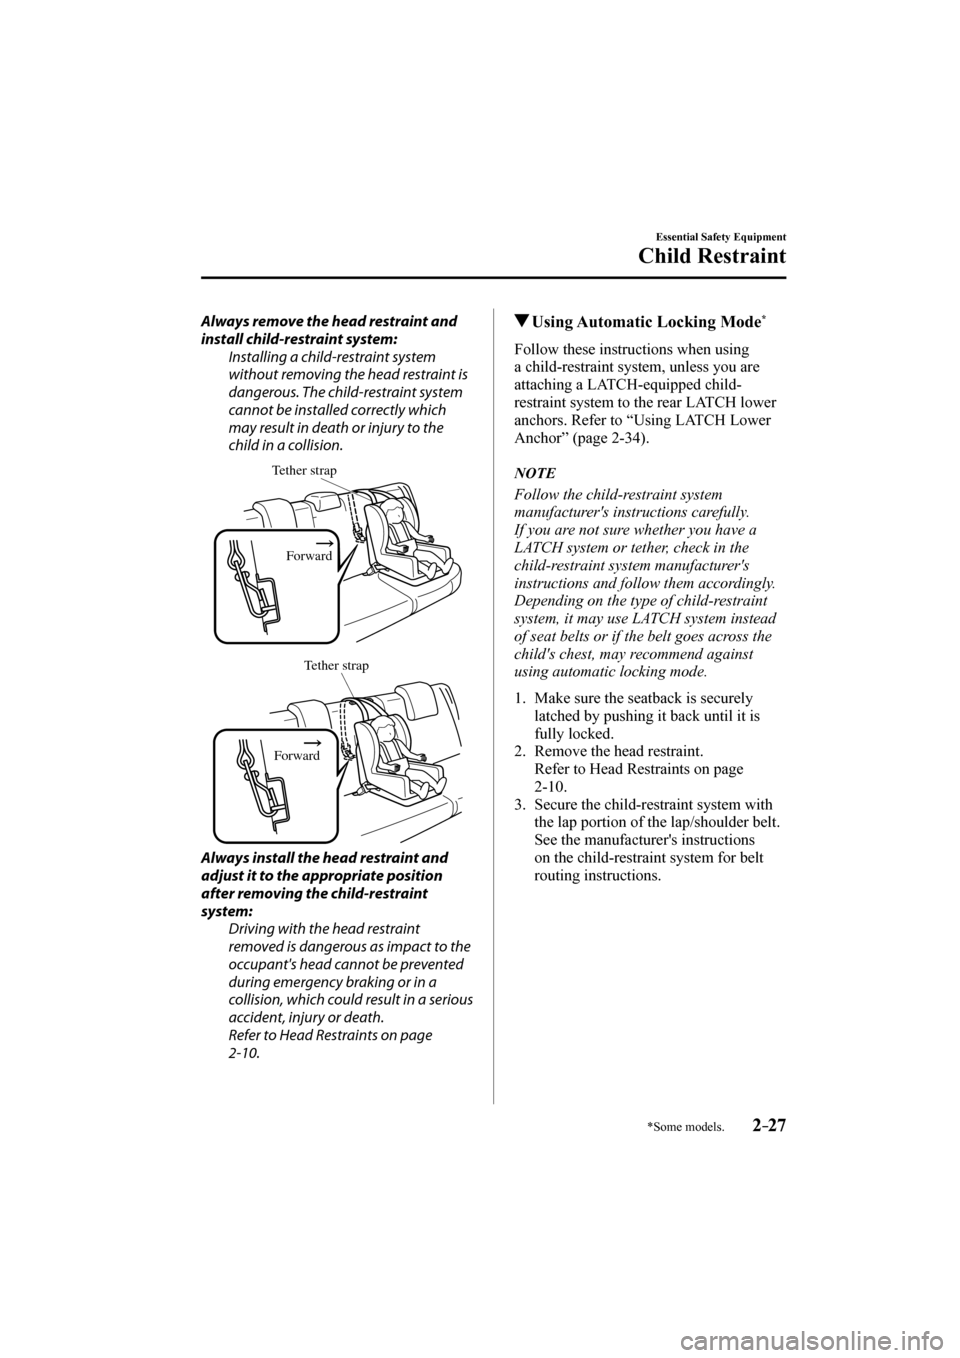 MAZDA MODEL CX-3 2017   (in English) Owners Guide 2–27
Essential Safety Equipment
Child Restraint
*Some models.
  Always remove the head restraint and 
install child-restraint system:
  Installing a child-restraint system 
without removing the head